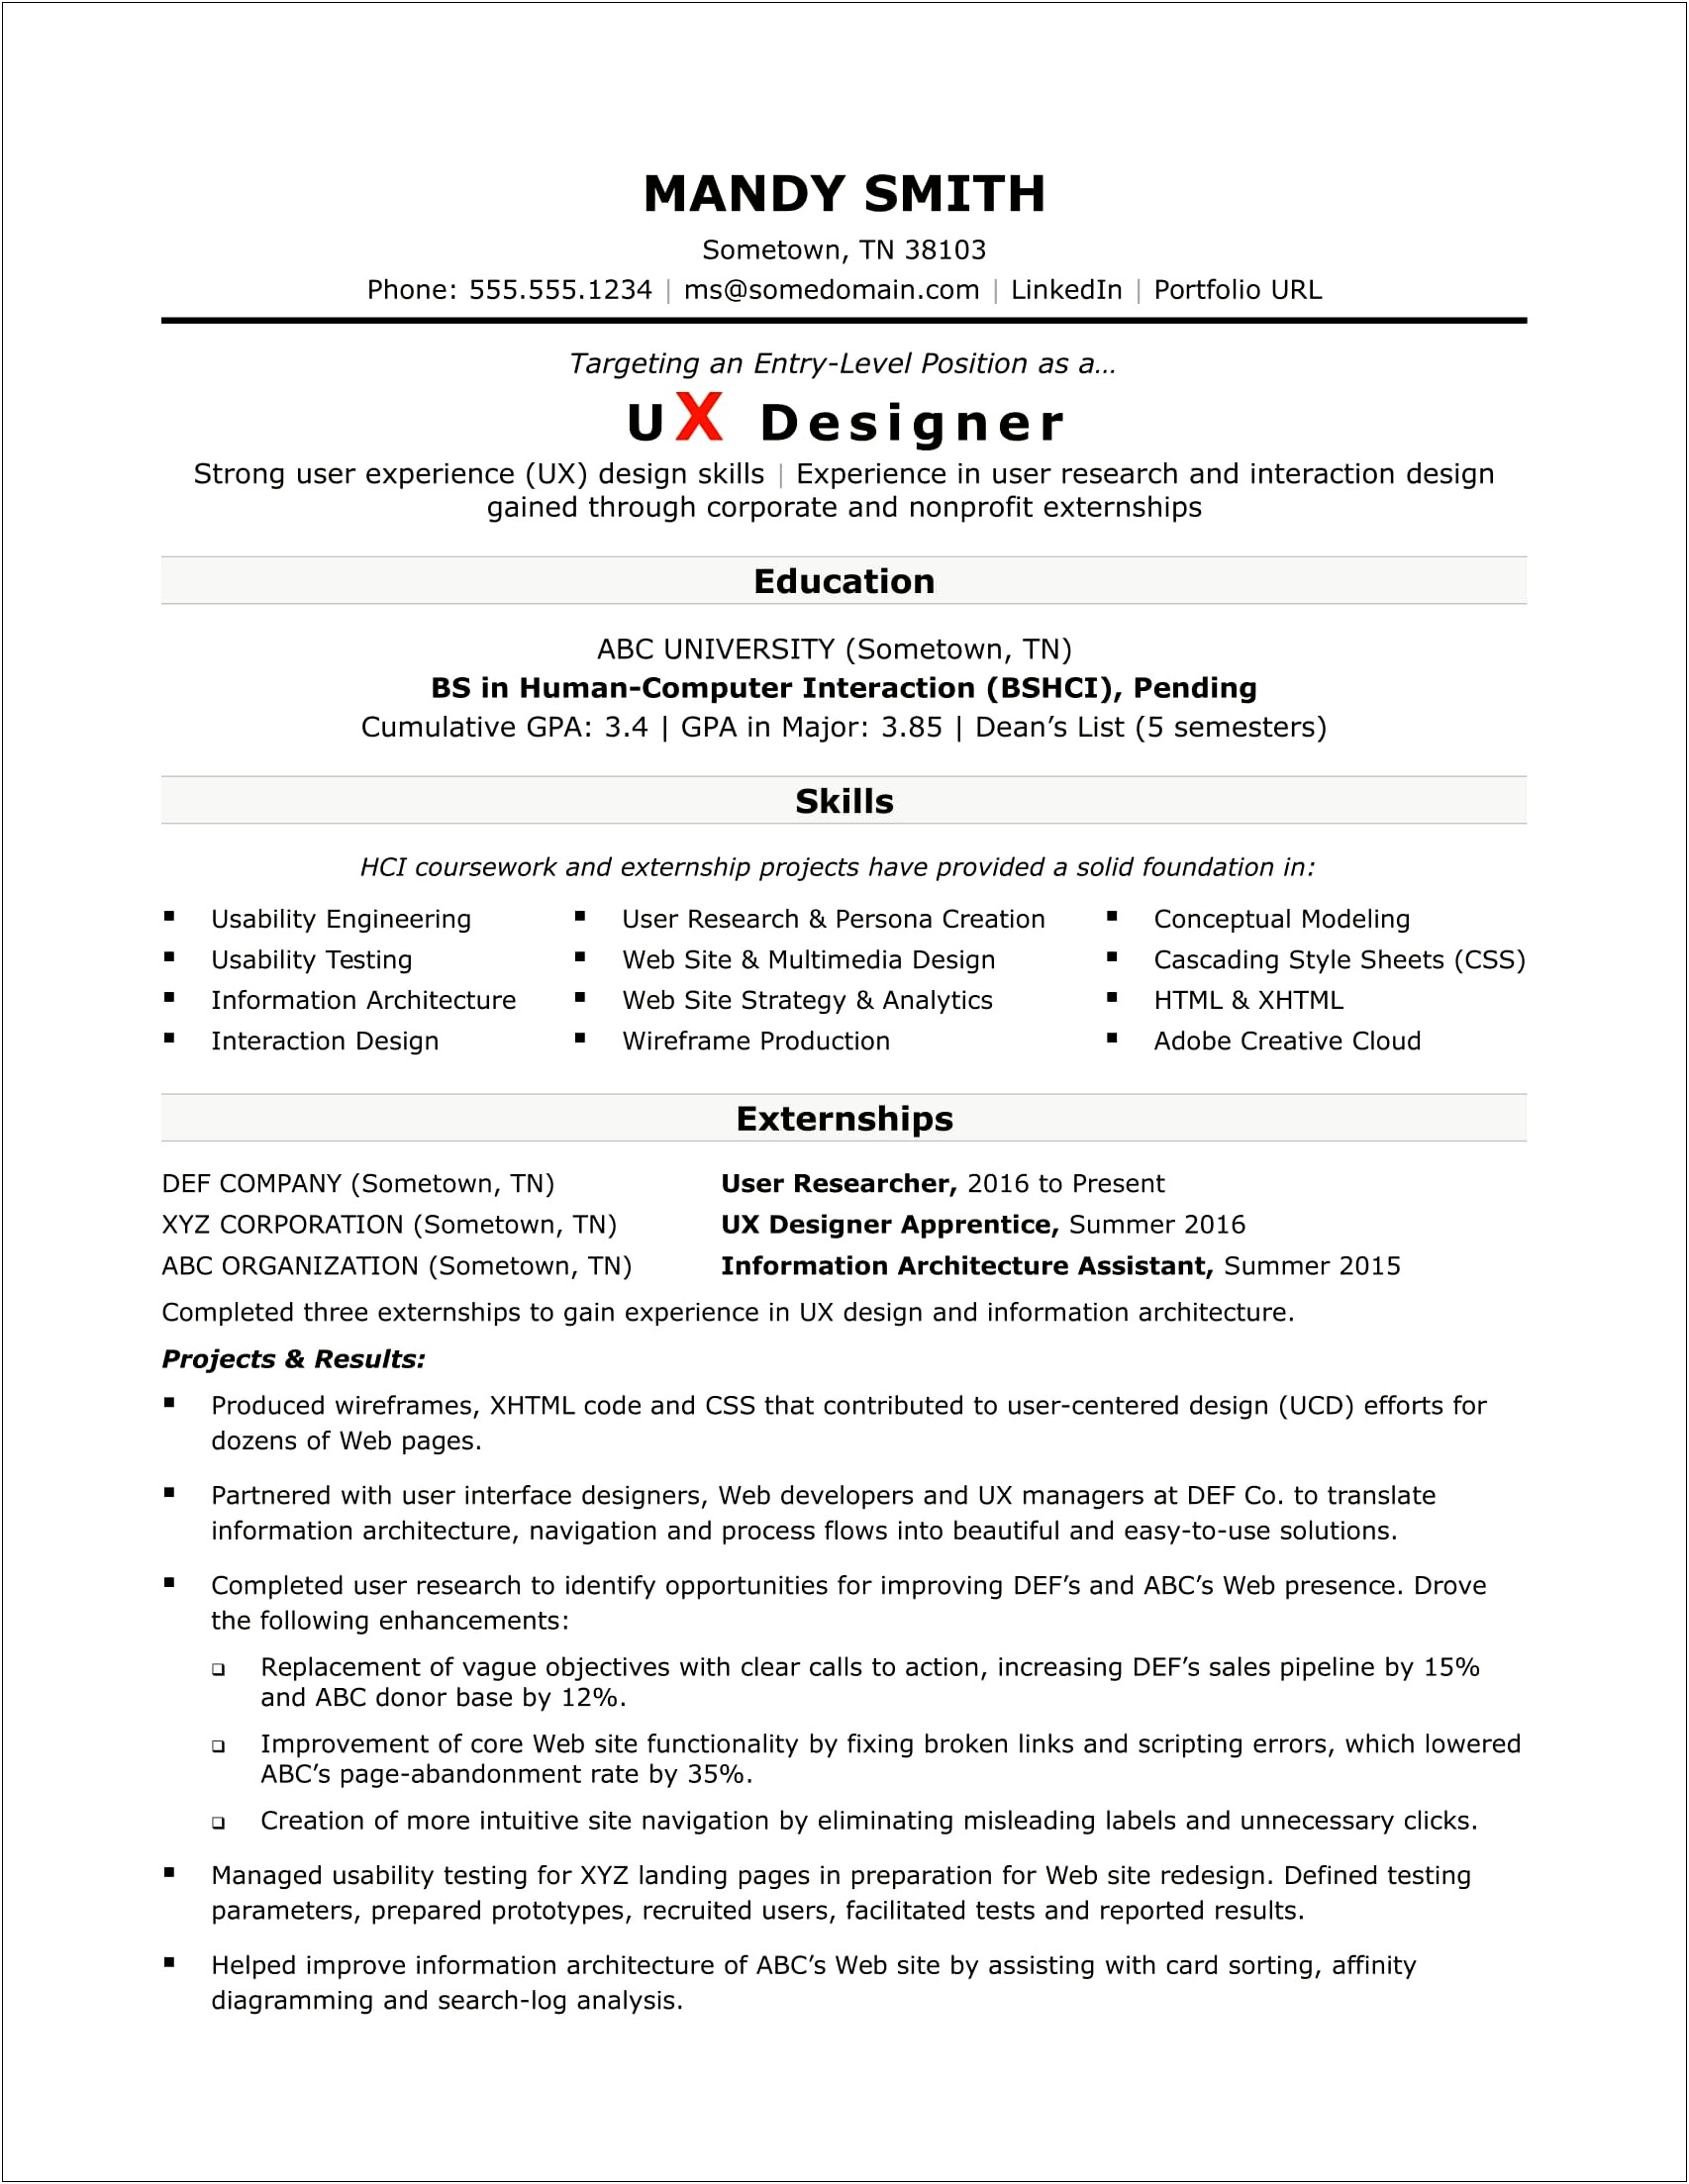 Resume For Research Position No Experience